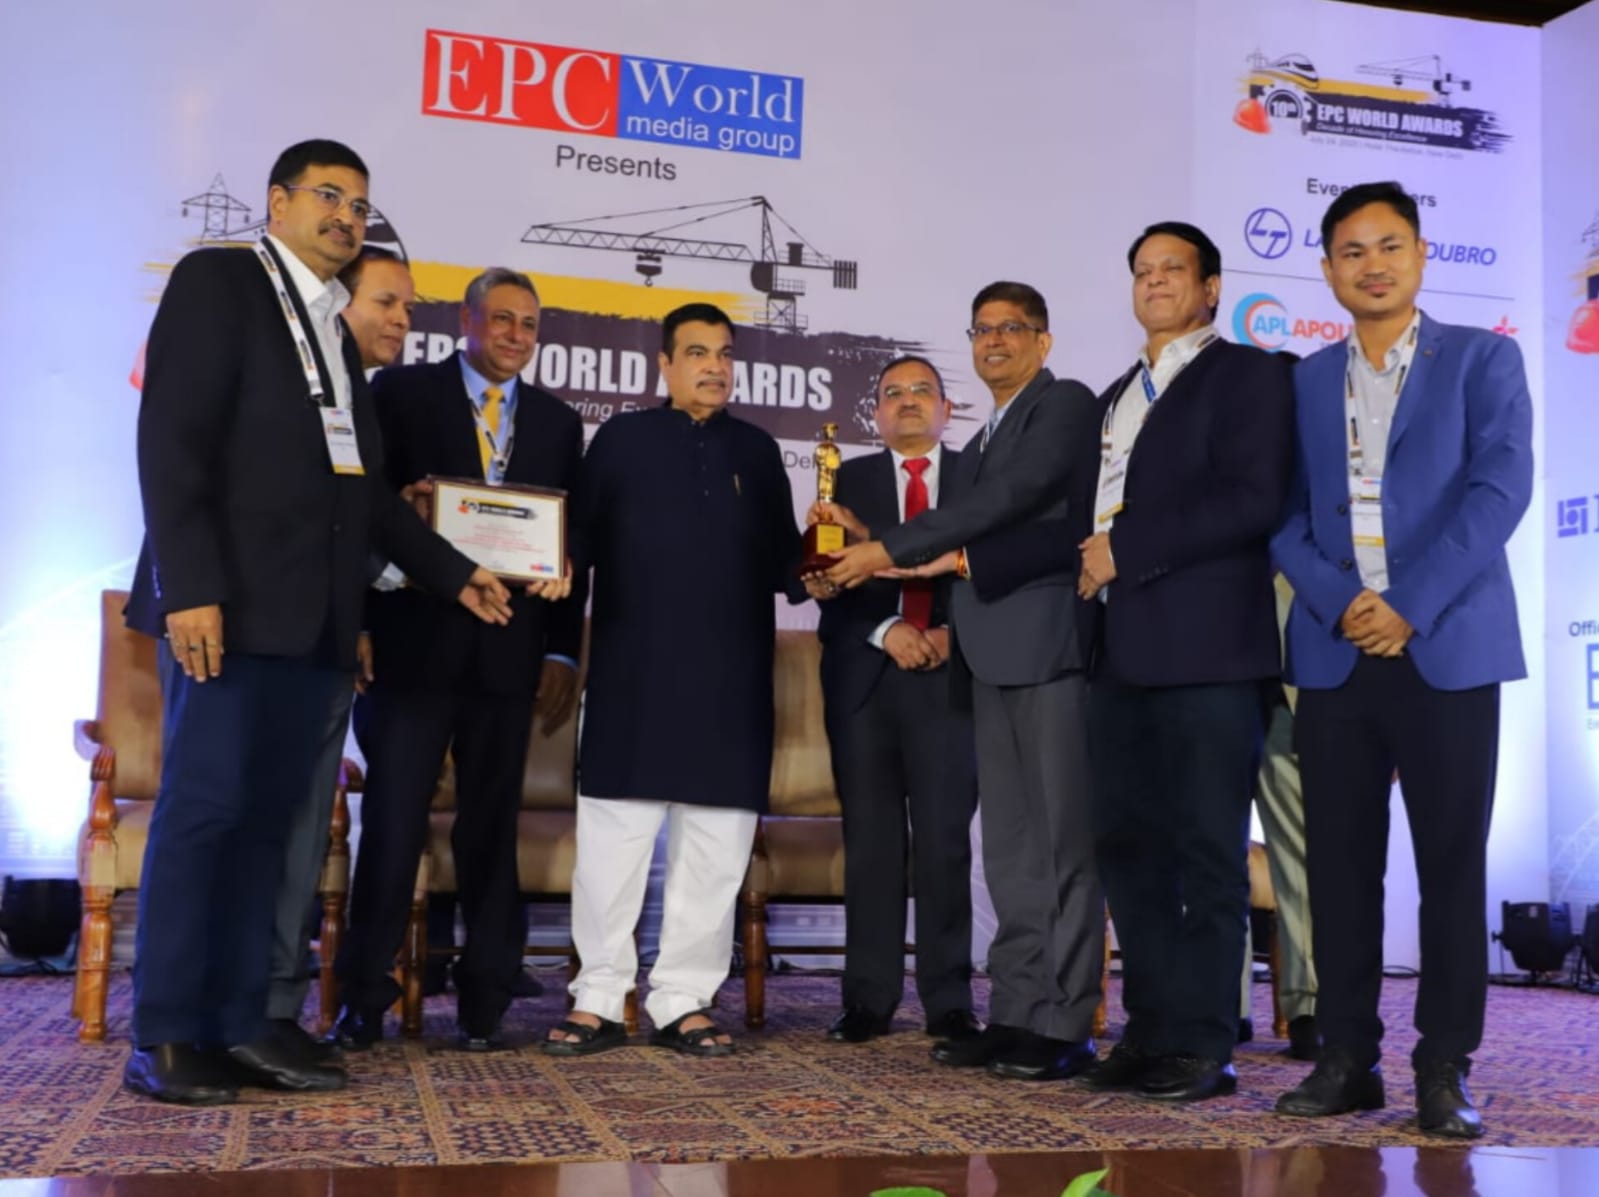 EPC World Award under the "Oil and Gas category"